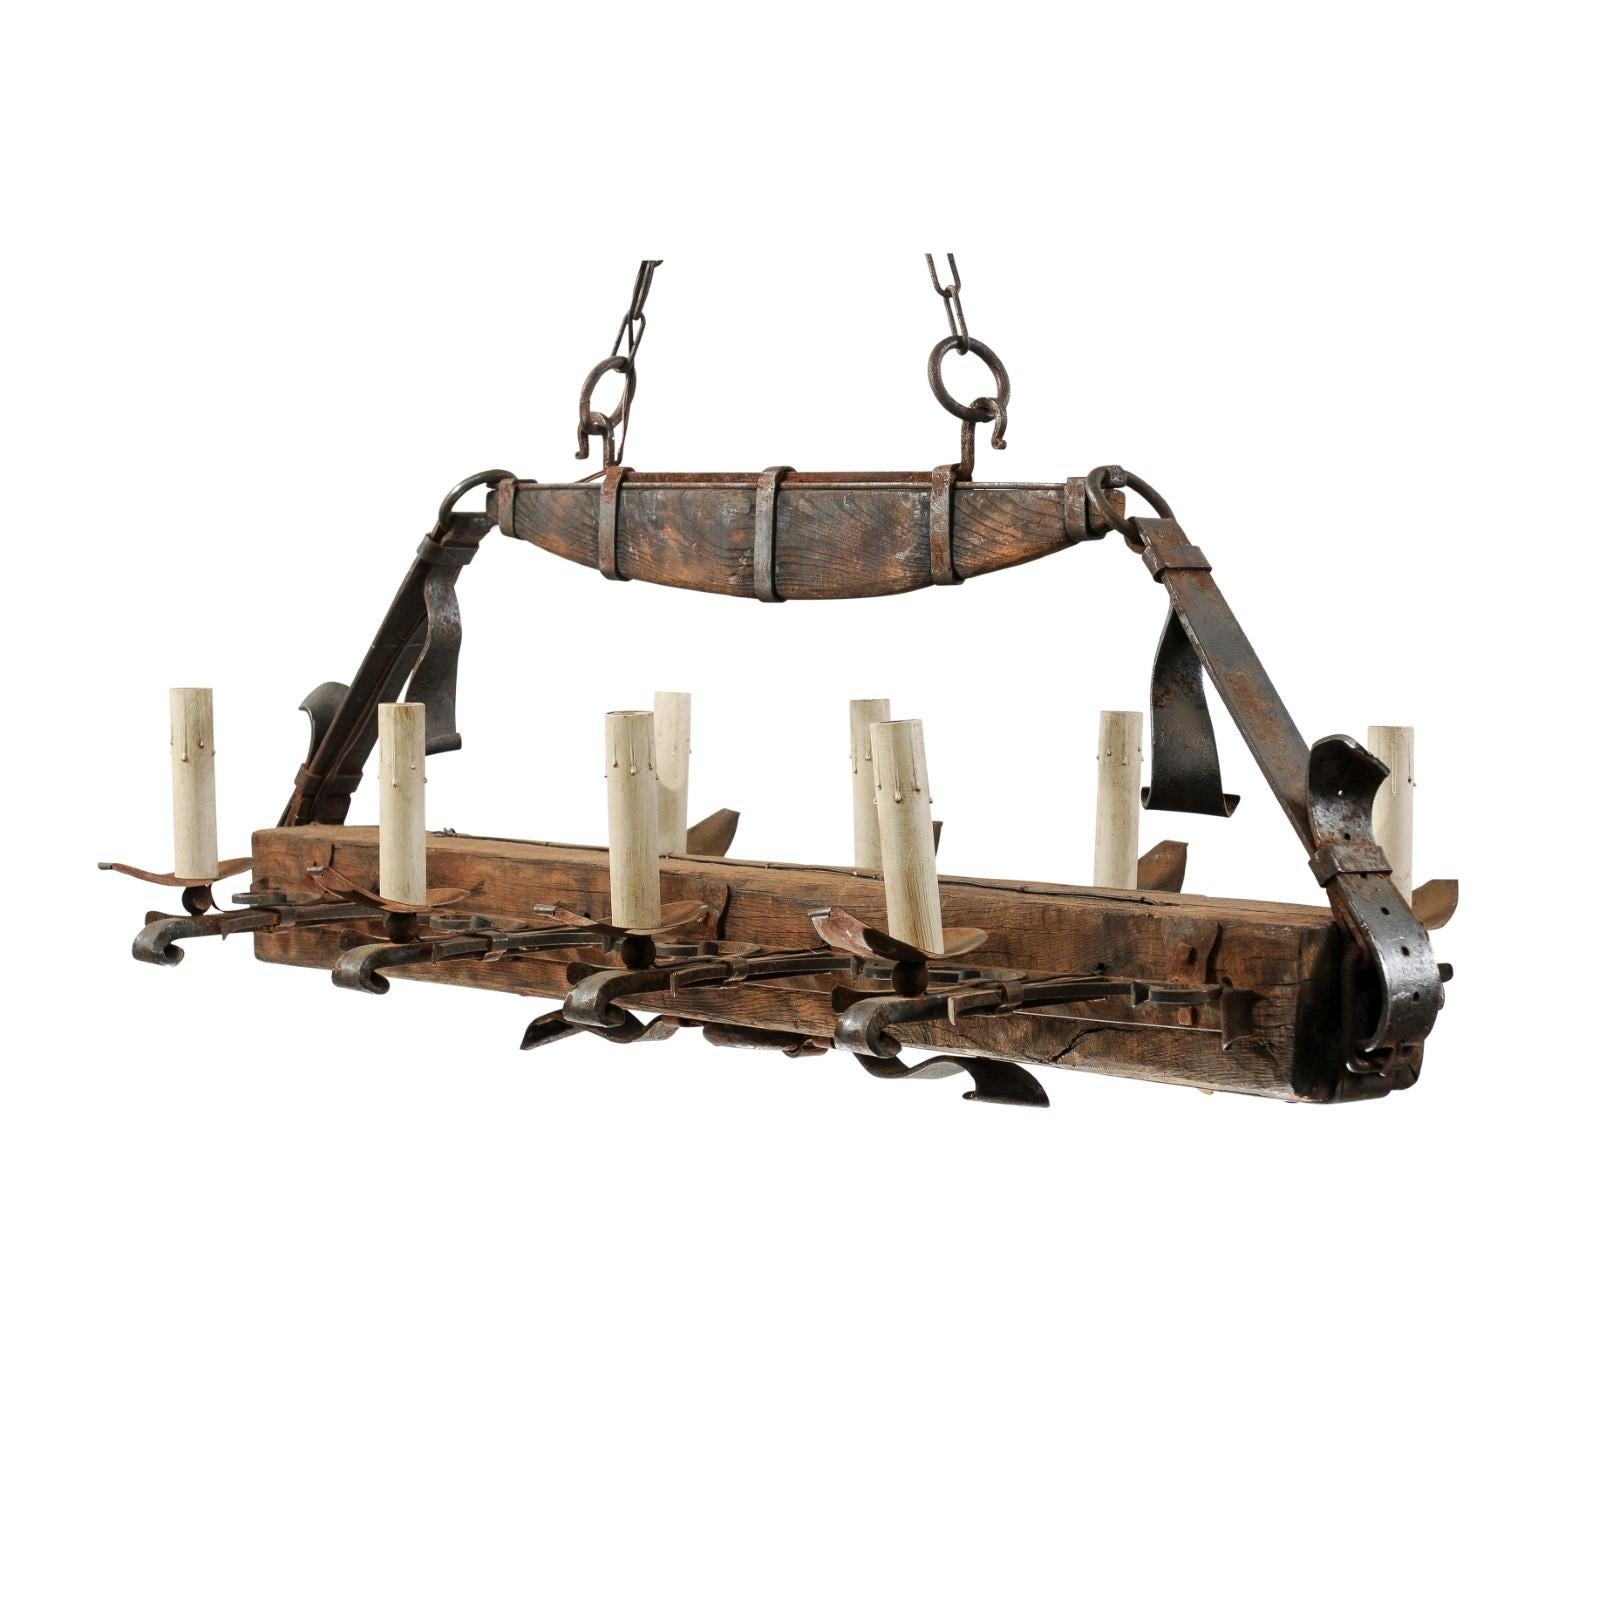 Unique French Midcentury Wooden Beam and Iron "Belted" Gentleman's Chandelier